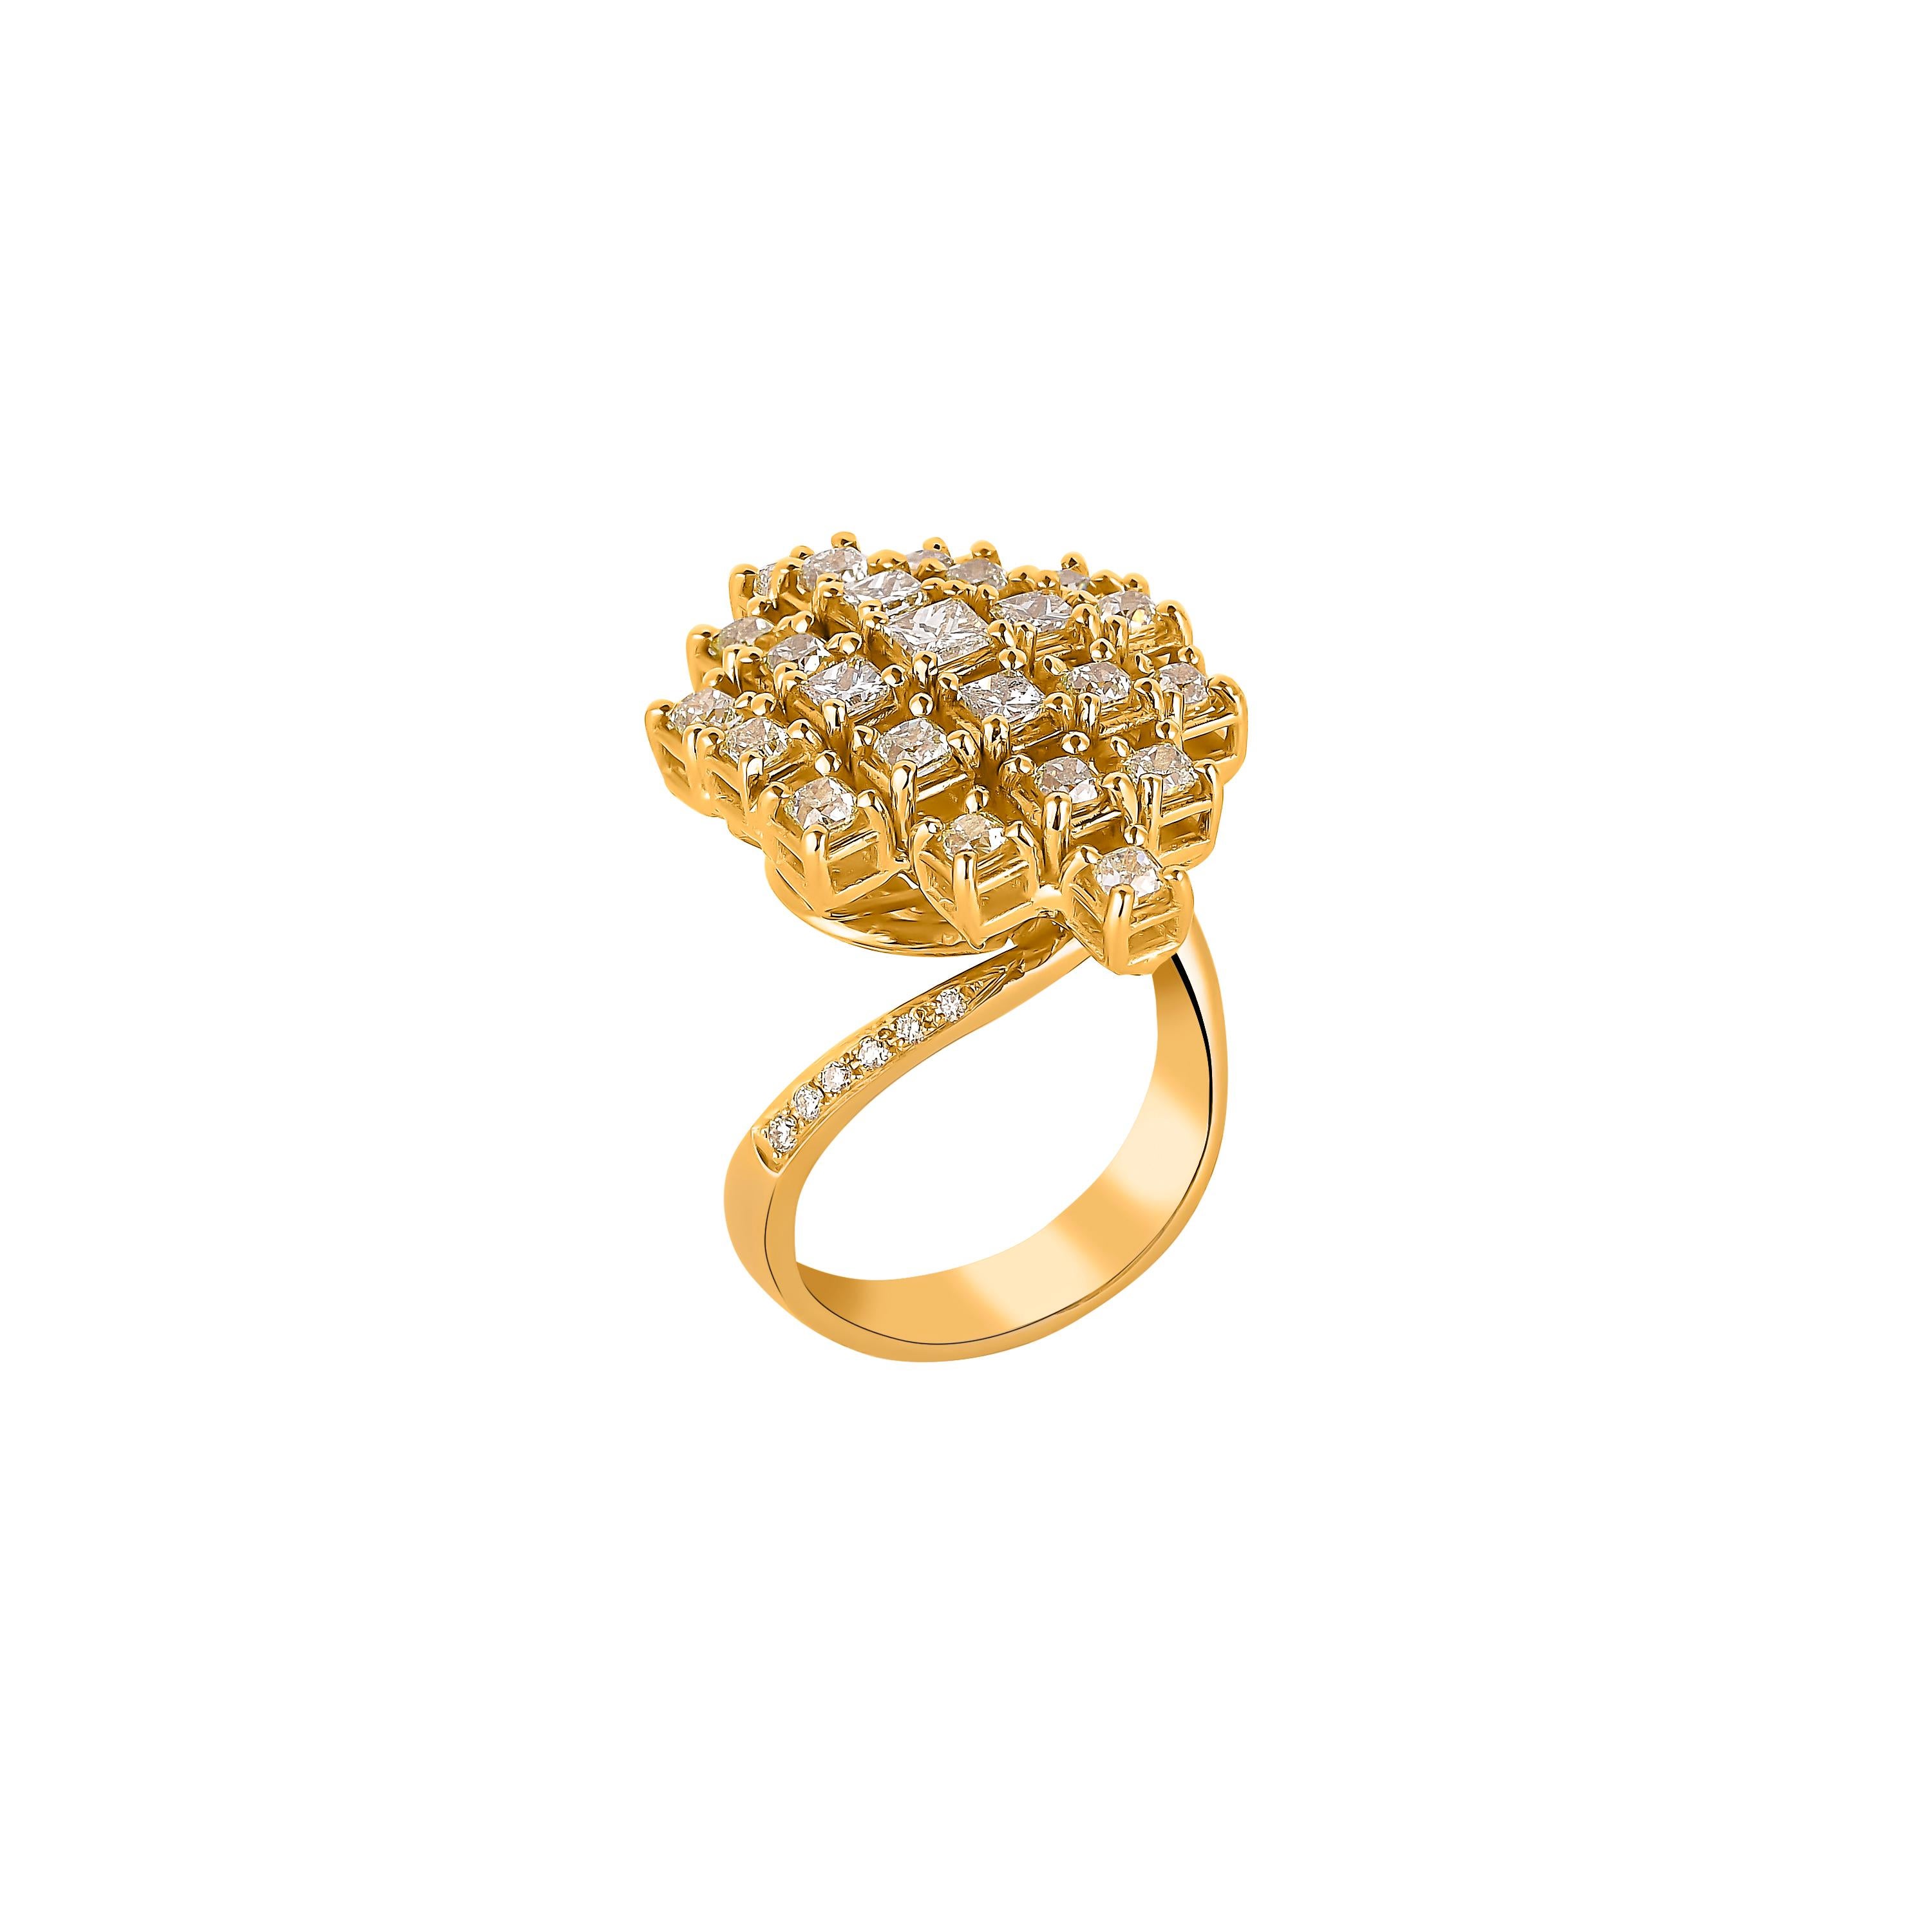 Contemporary 2.3 Carat Yellow Diamond Ring in 18 Karat Yellow Gold For Sale